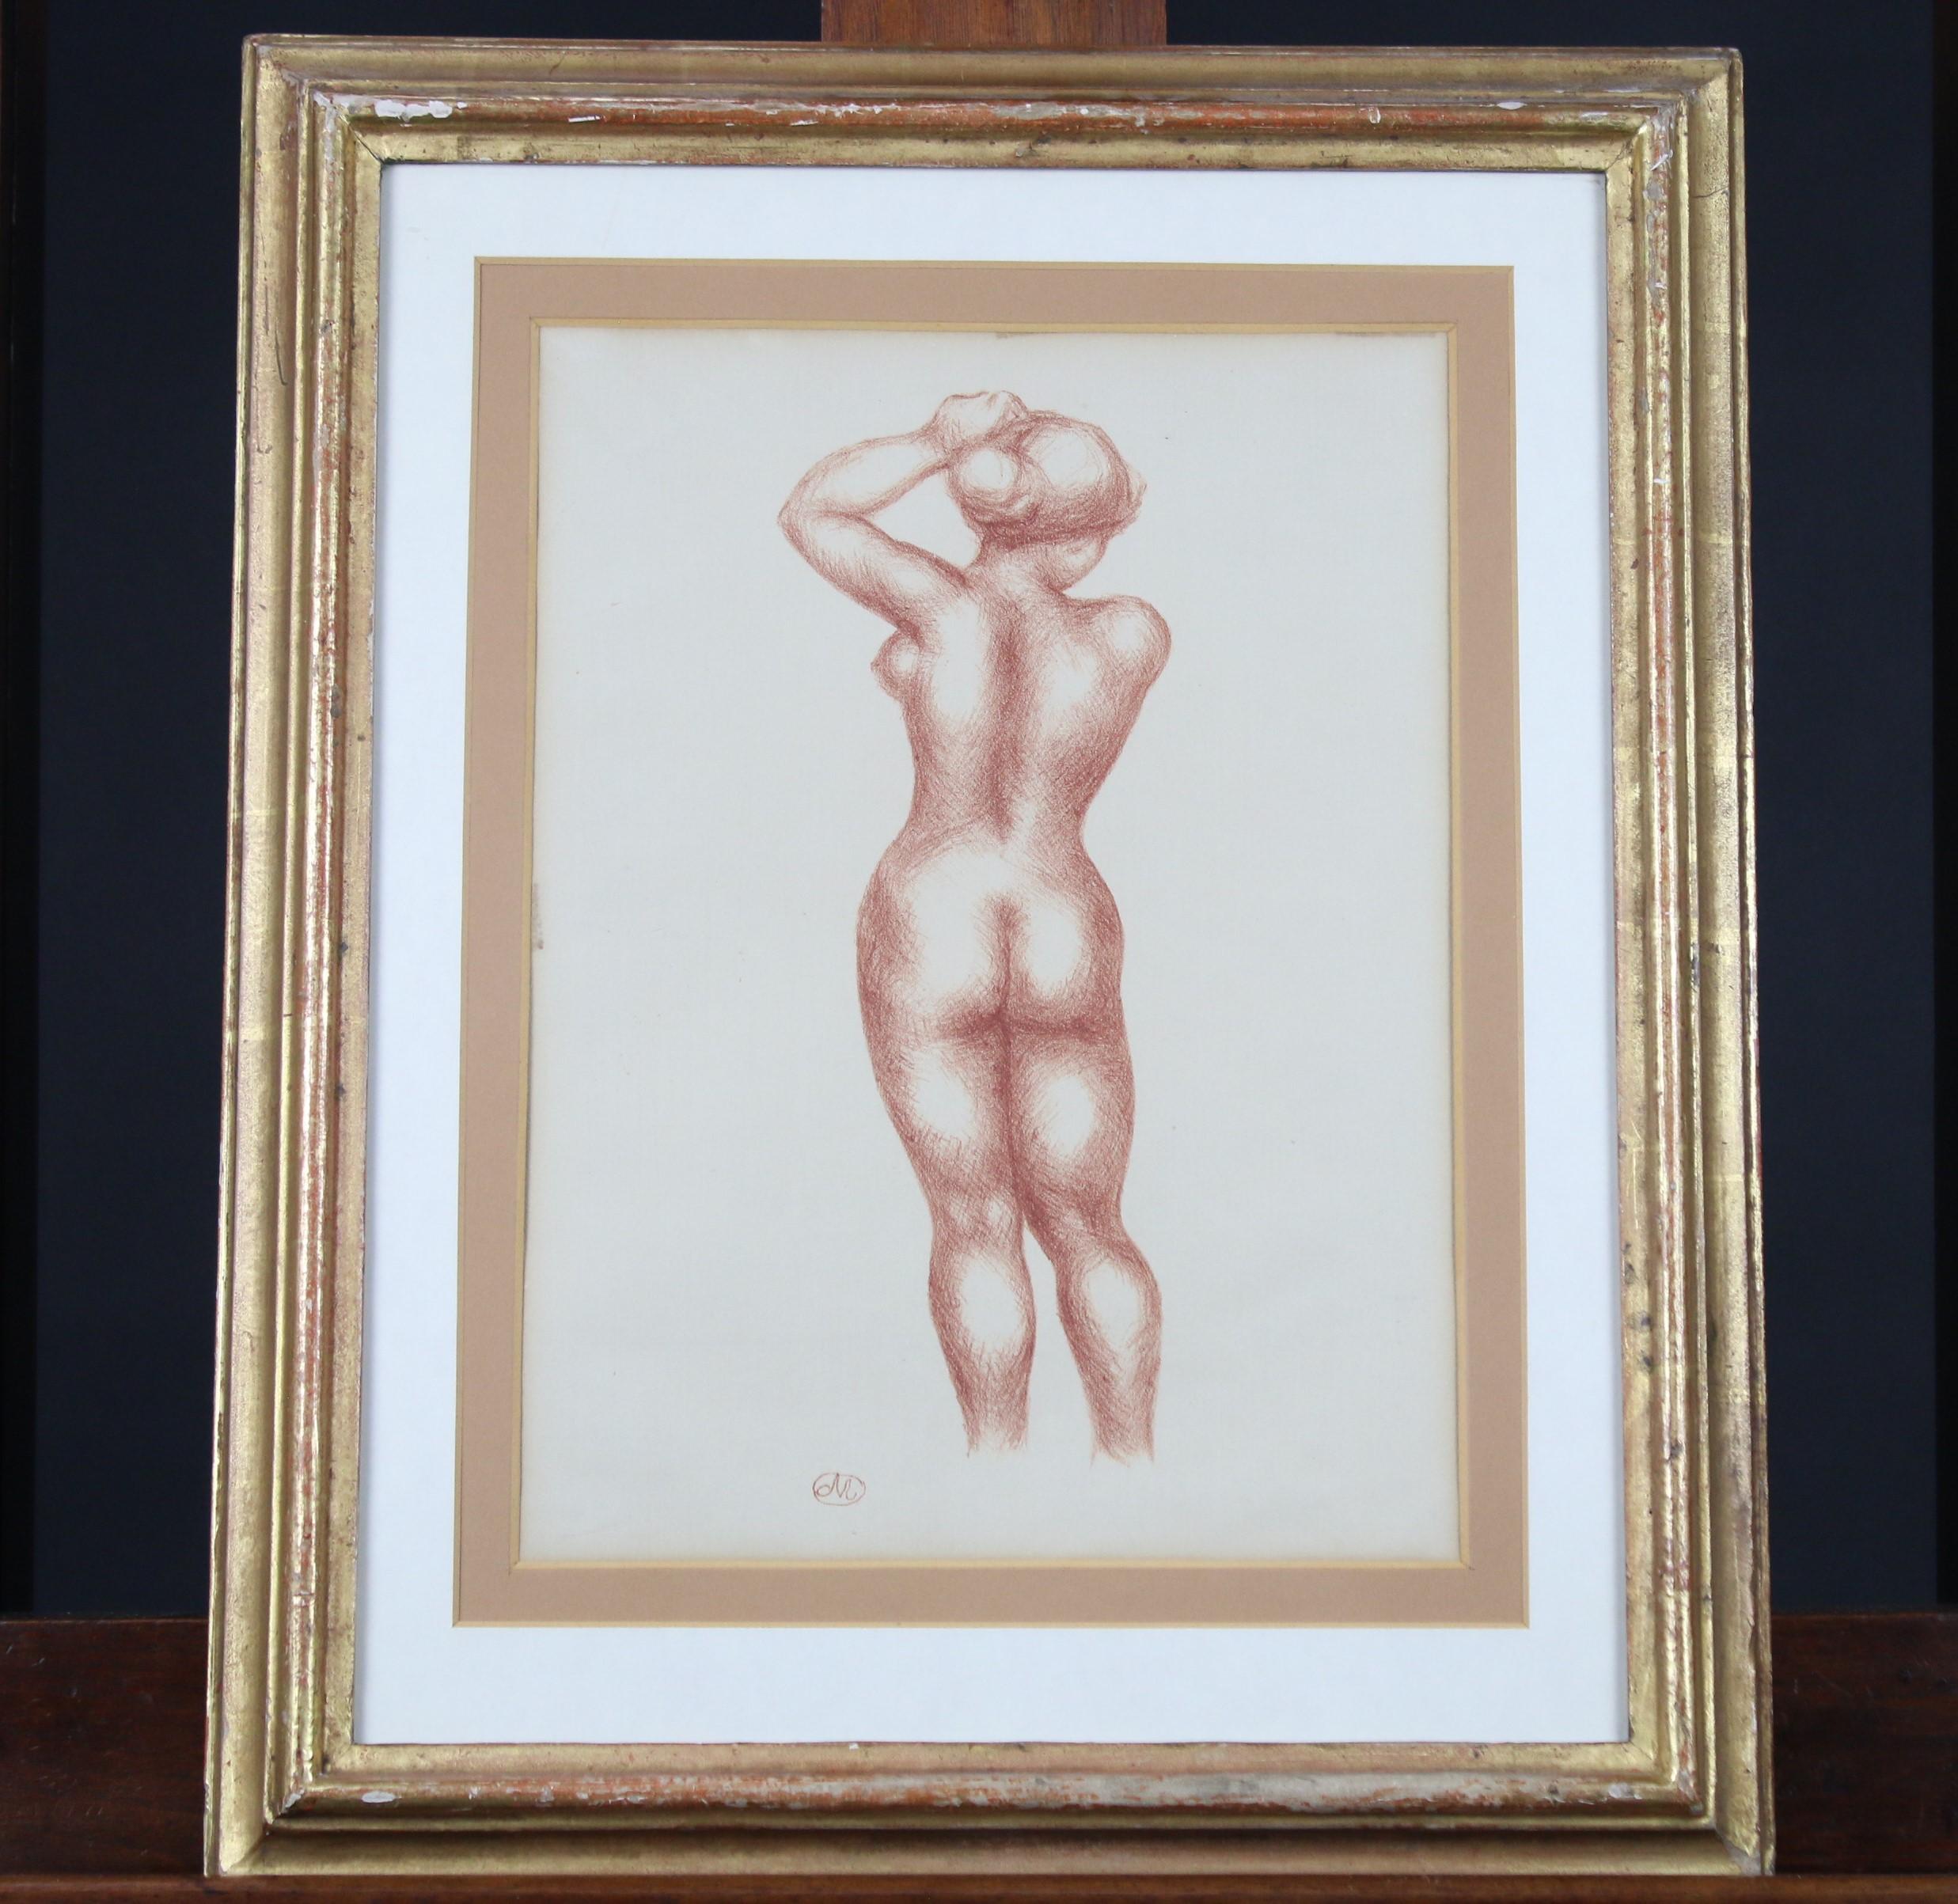 Standing Female Nude from the Back from the portfolio of Aristide Maillol: Sculpture and Lithography, 1925. Original frame.
